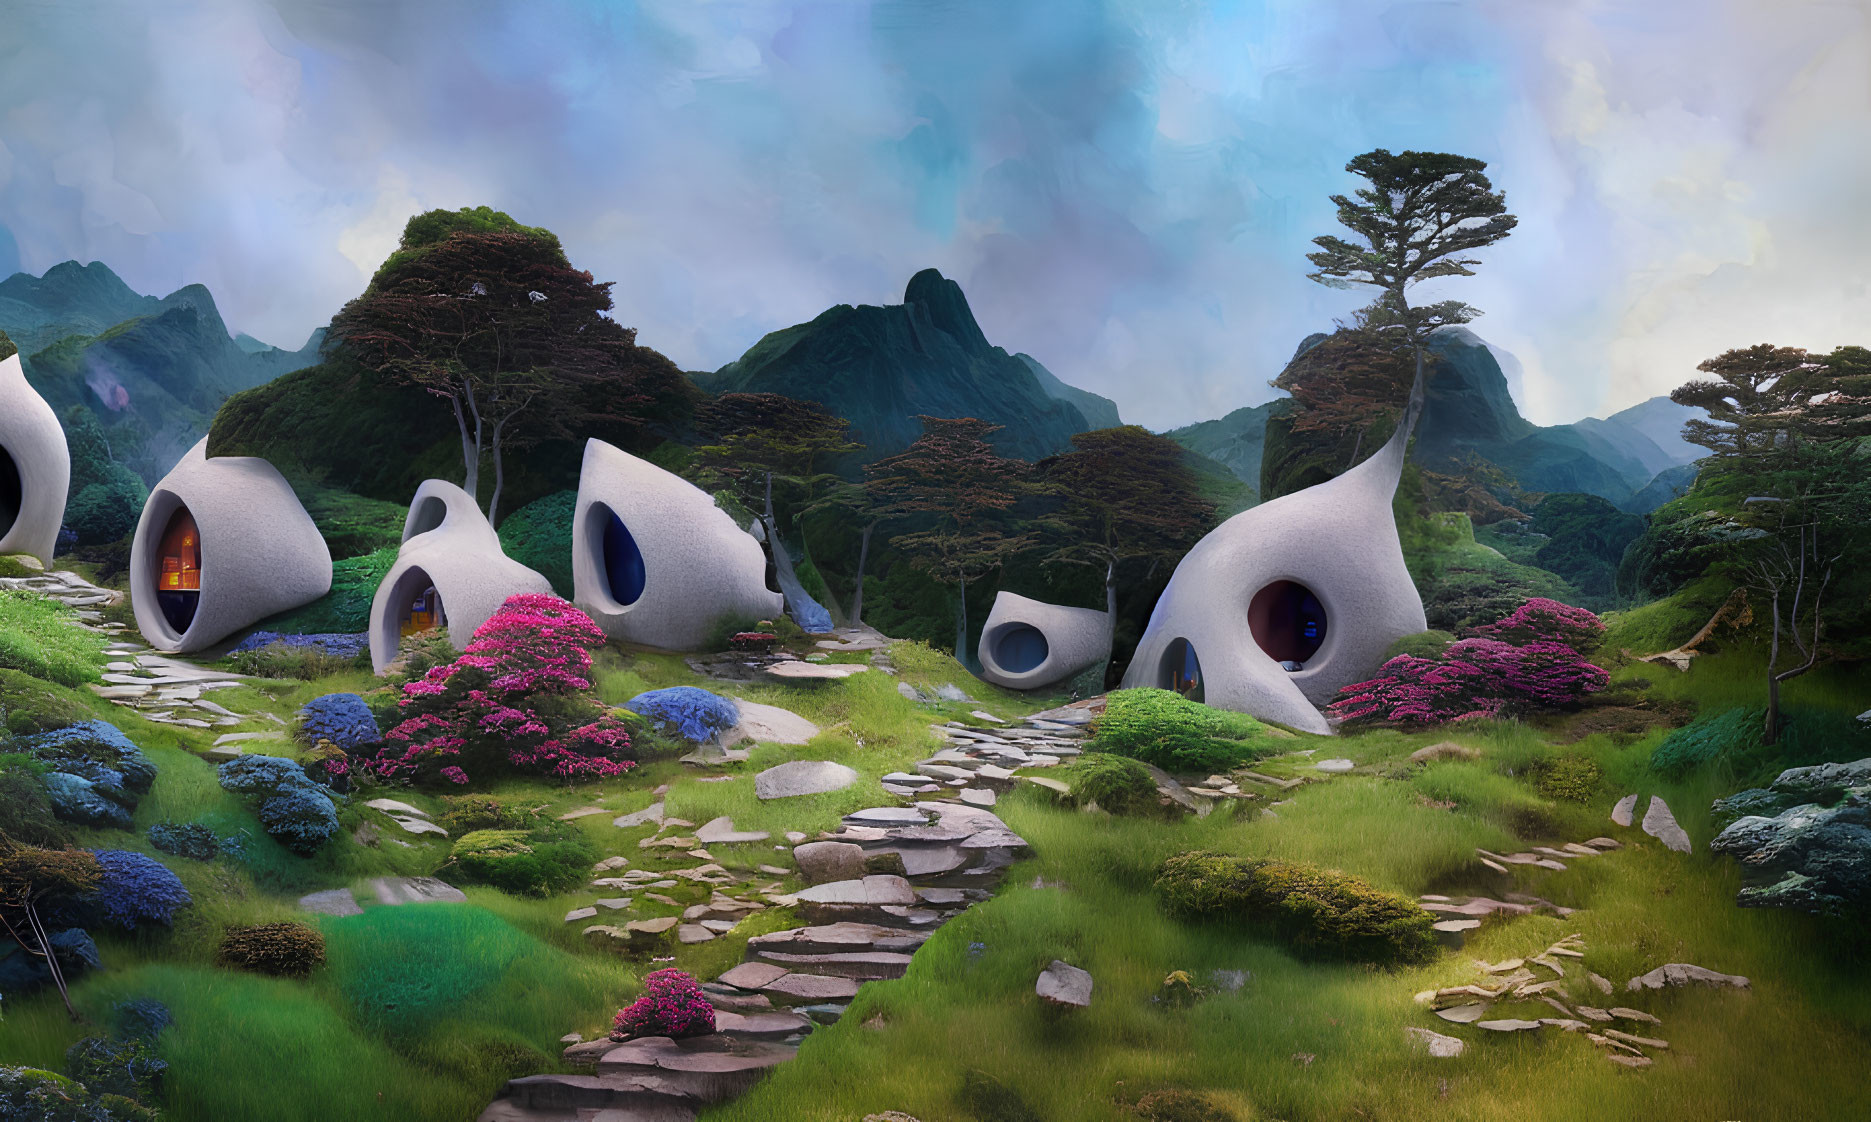 Organic pod-shaped houses in whimsical landscape